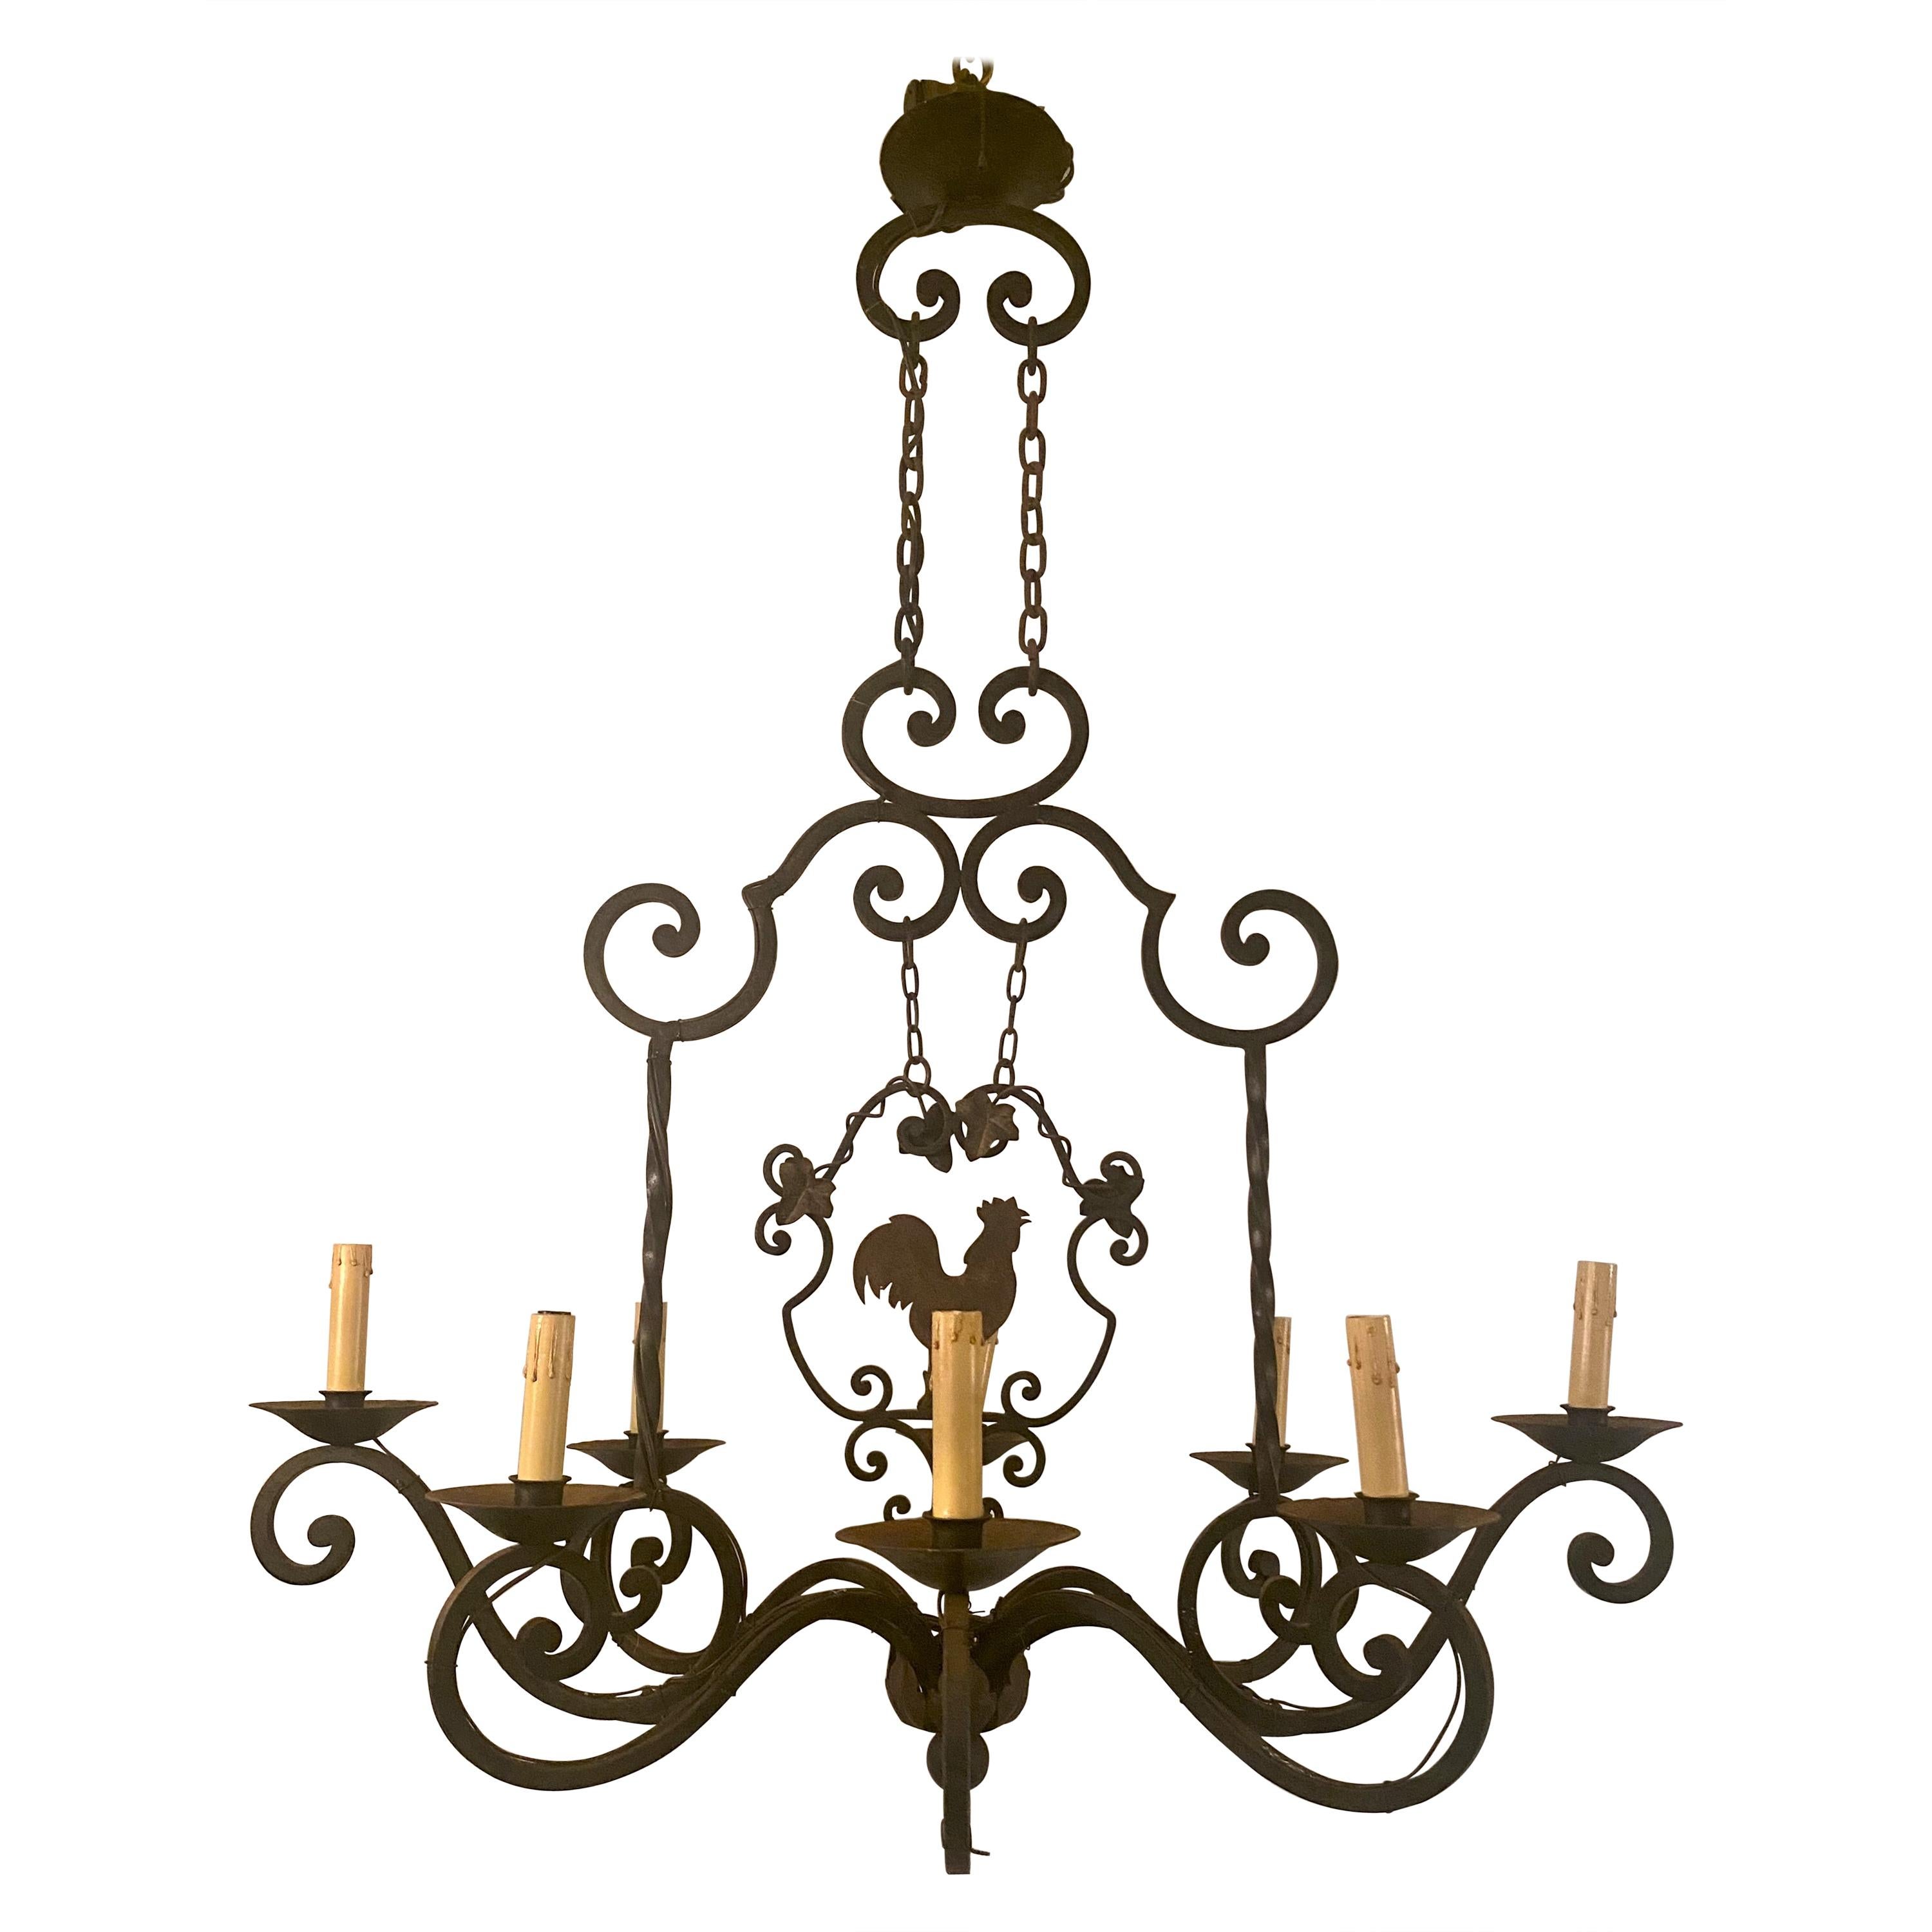 Antique French Wrought Iron "Rooster" Chandelier, Circa 1900